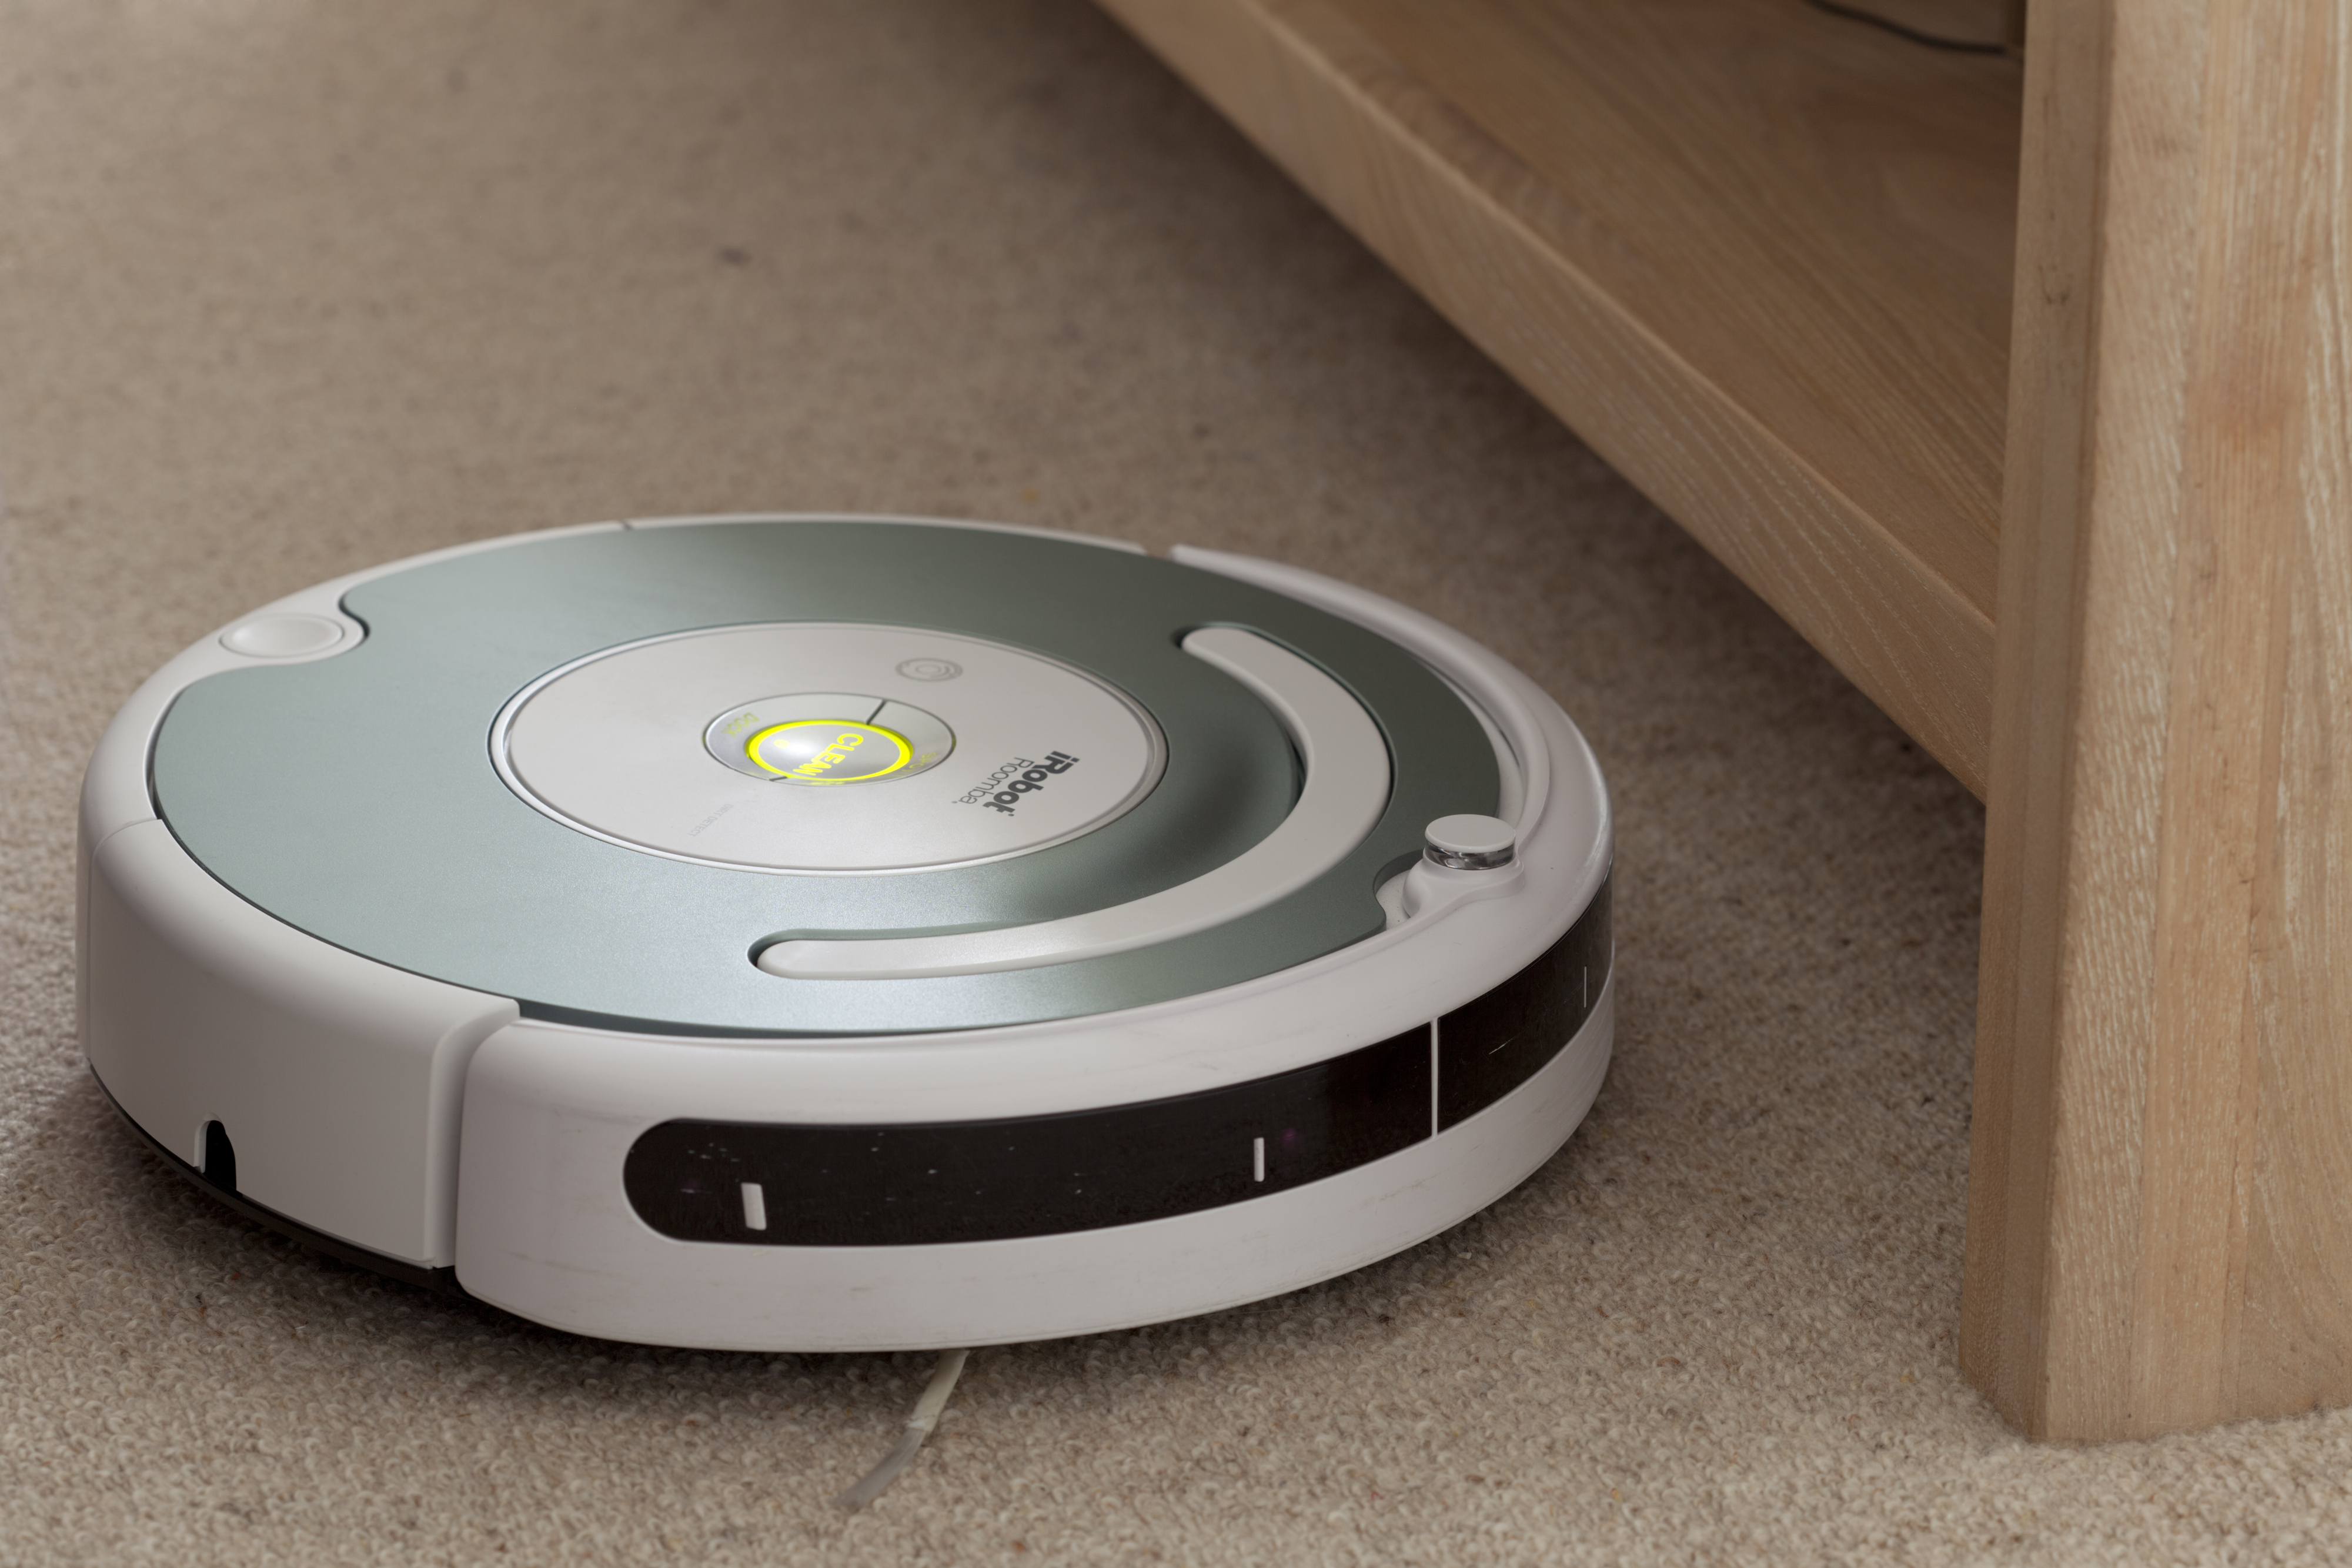 Robotic vacuum cleaner operating on a carpet near a piece of furniture